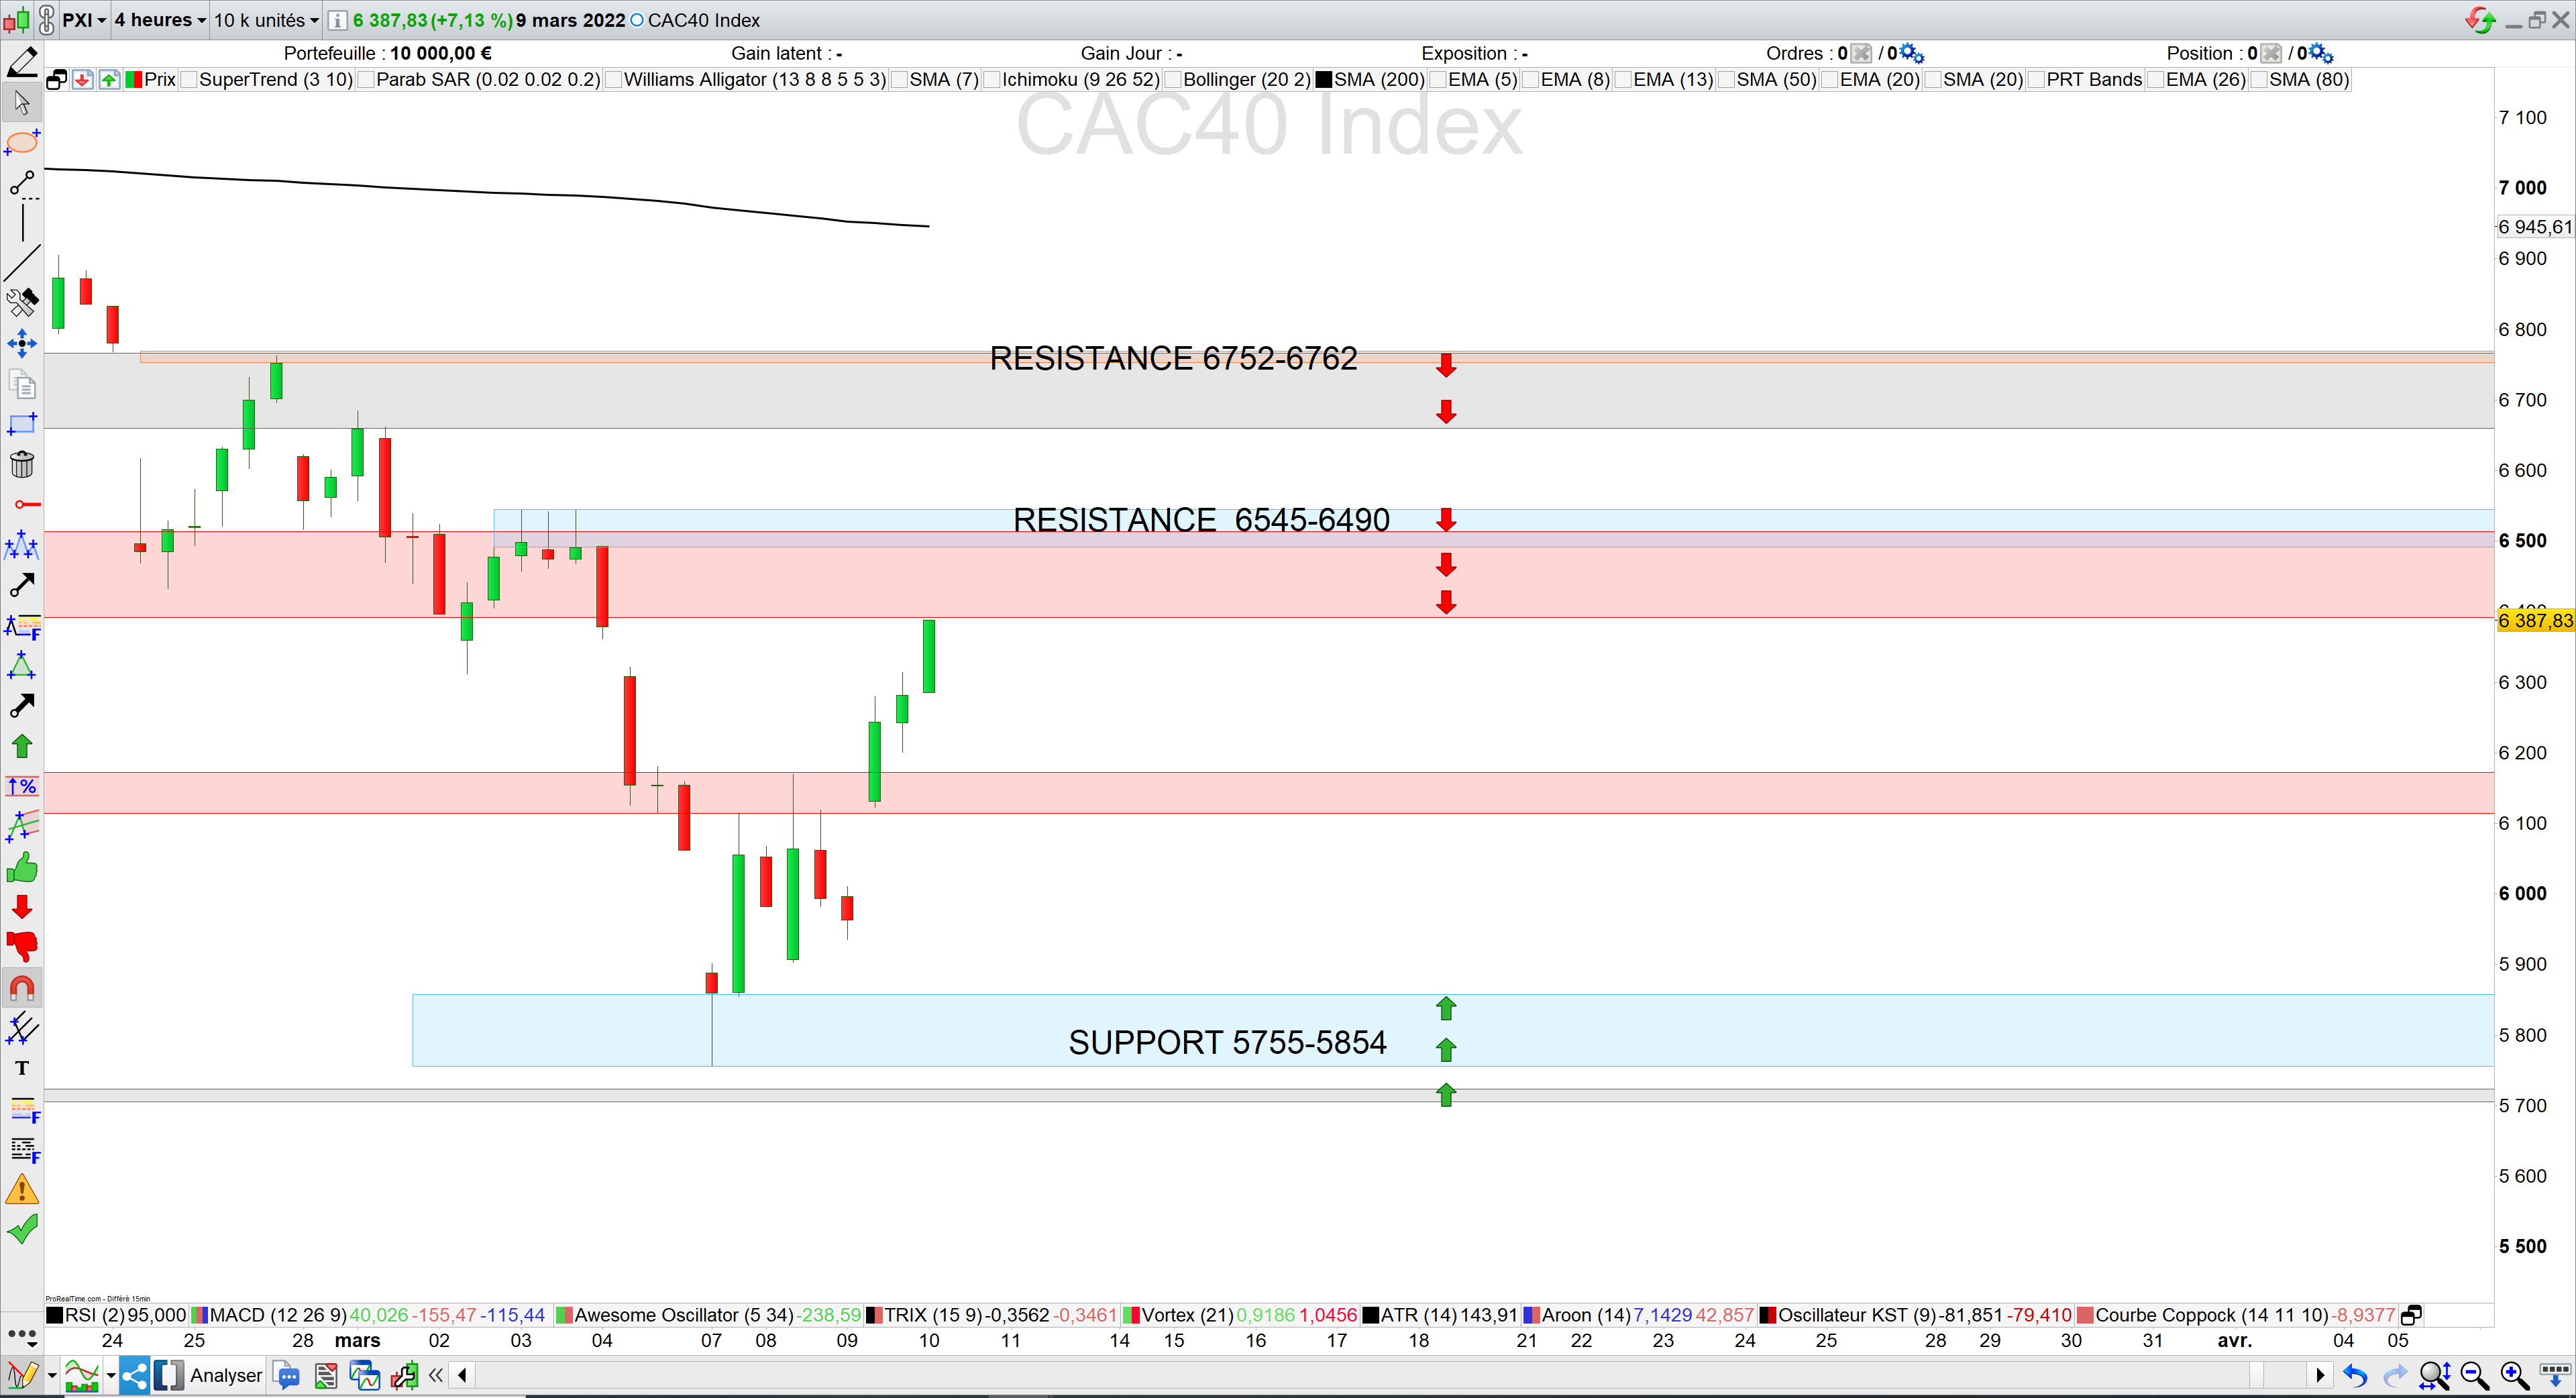 Trading cac40 10/03/22